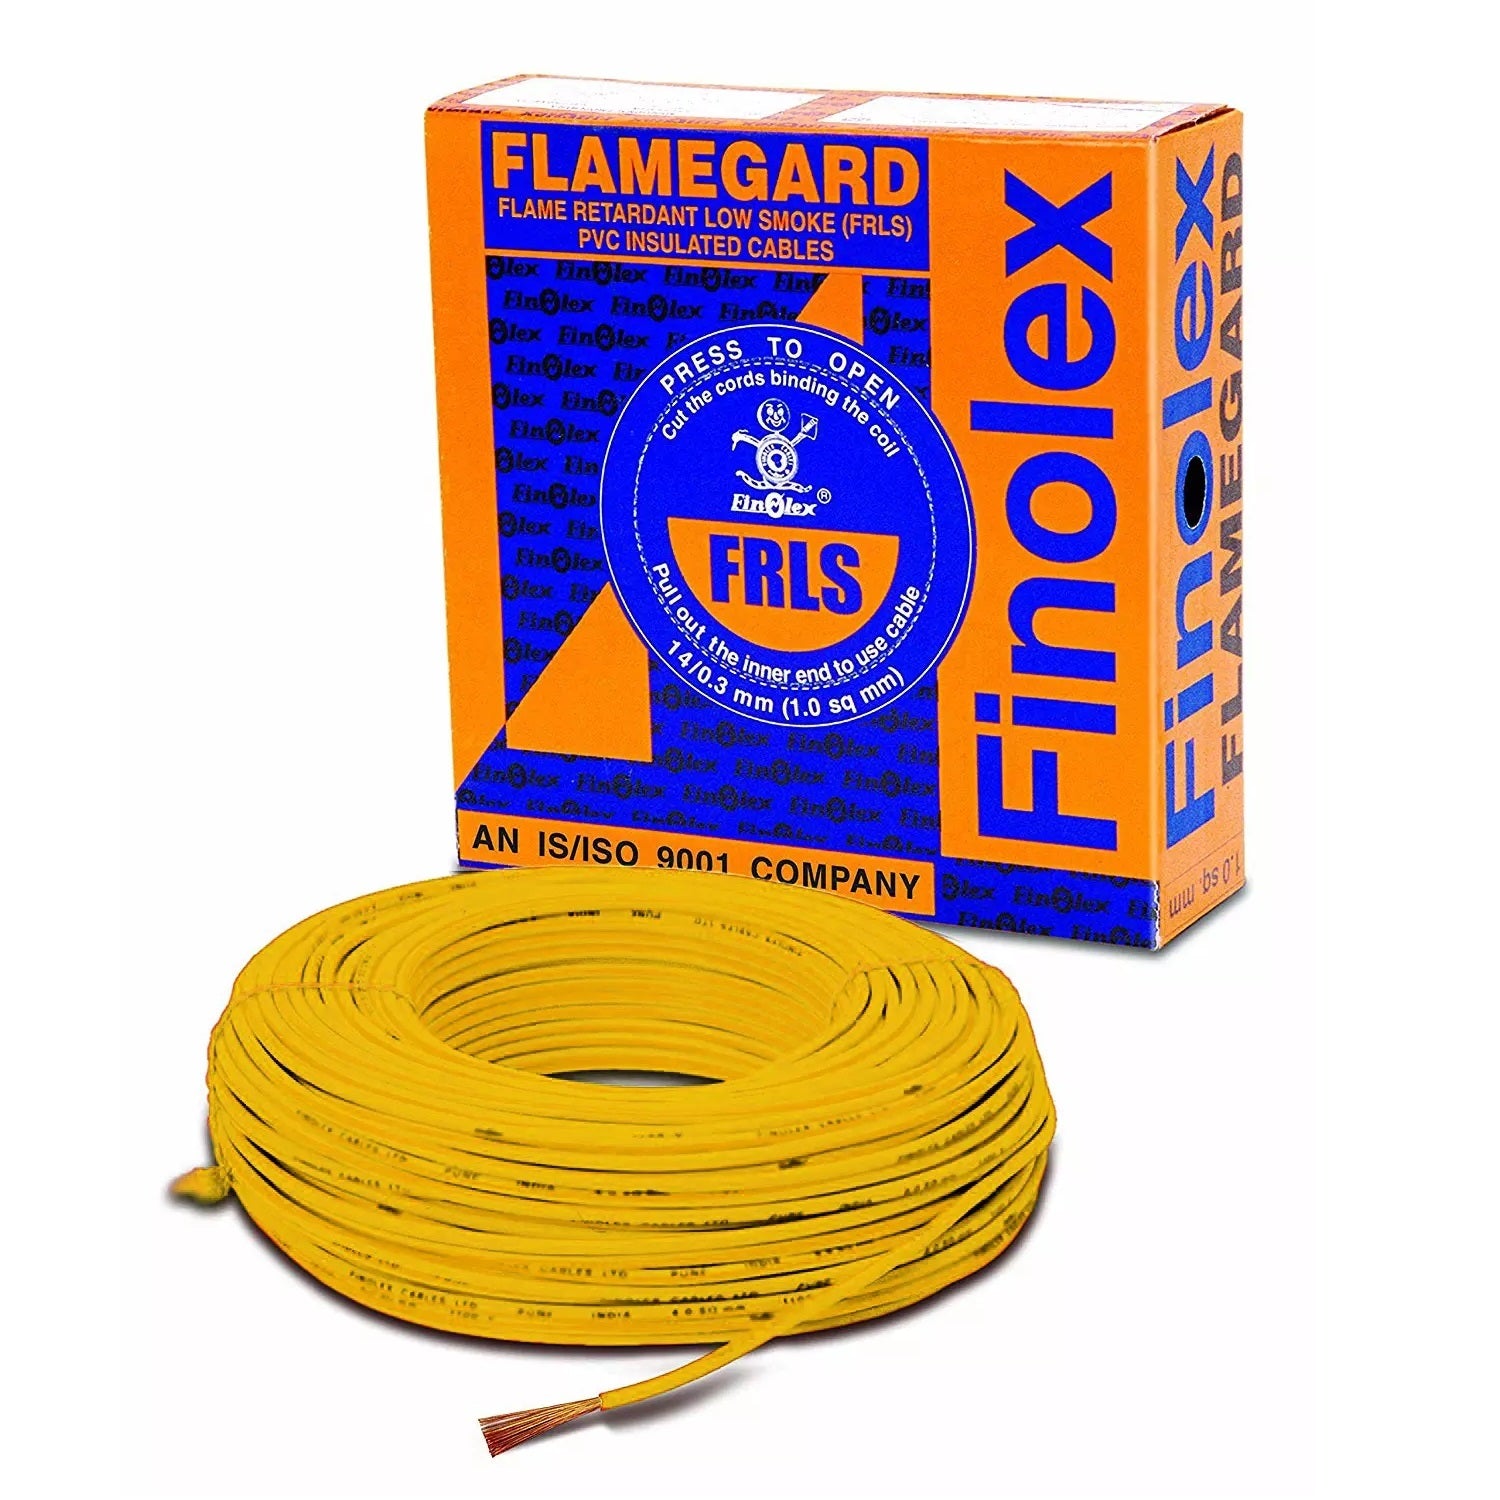 Finolex Flamegard-Flame Retardant Low Smoke Industrial Cables 180m Coil Project Packing